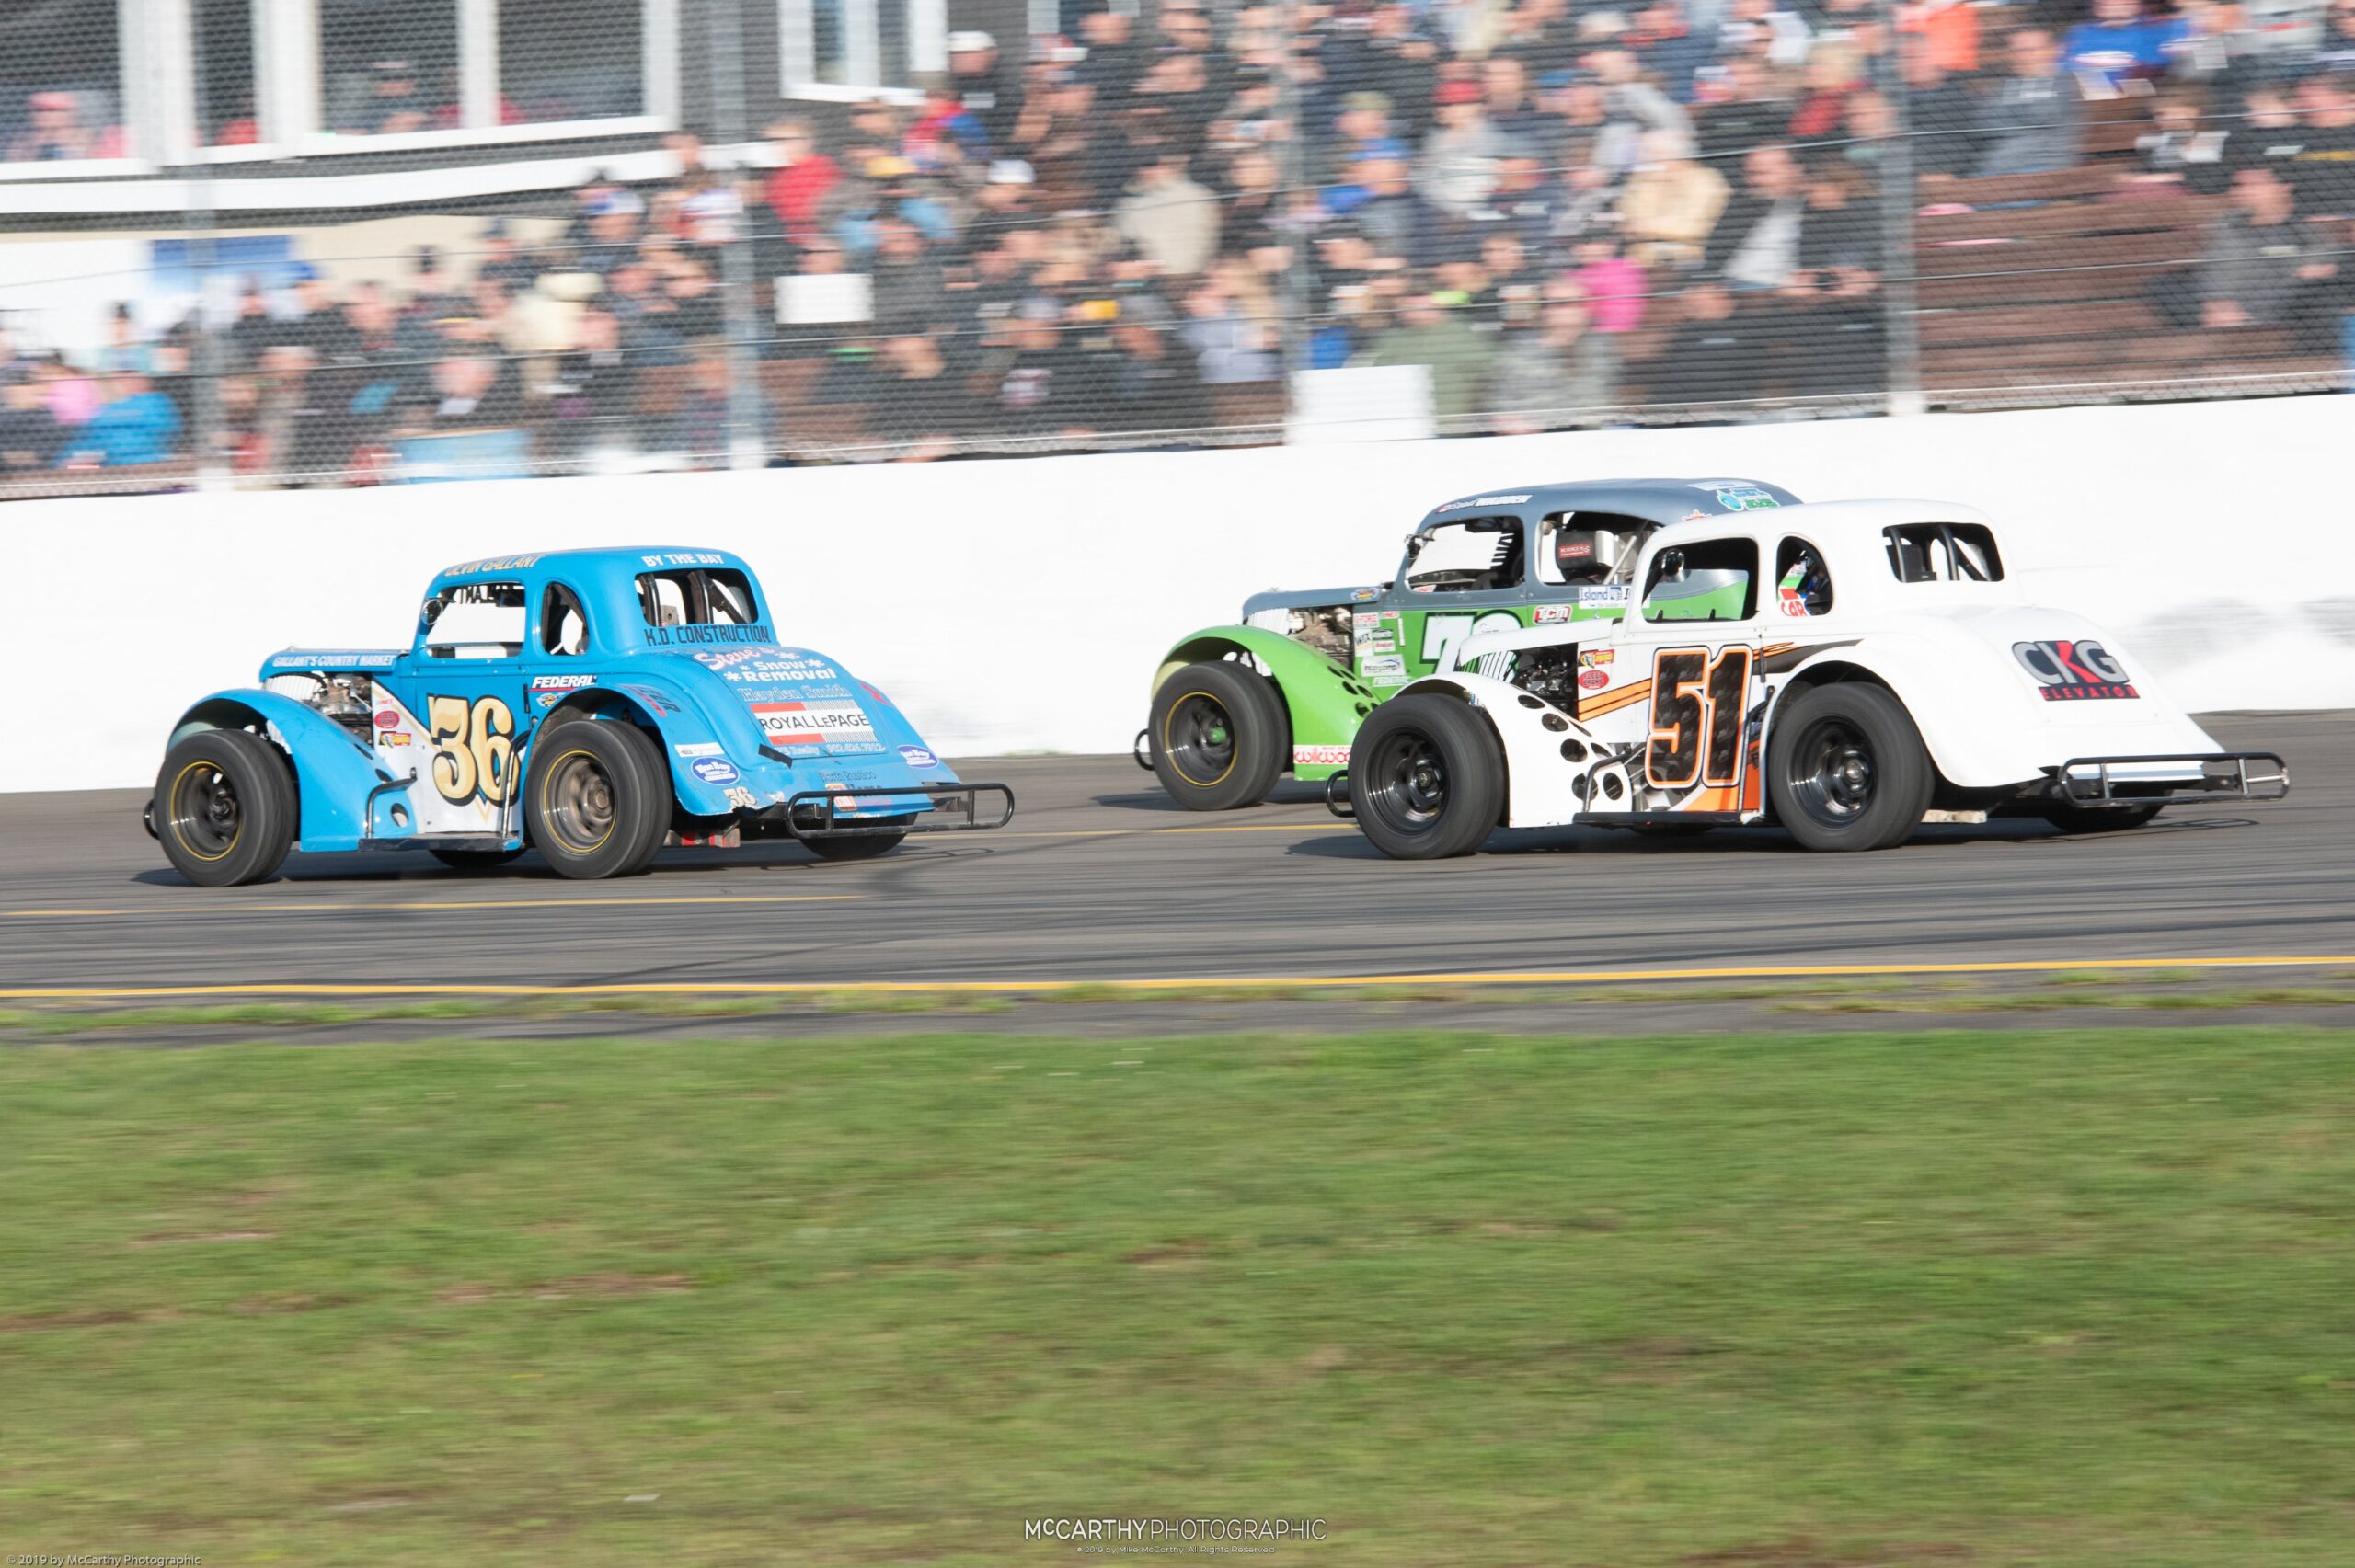 MARITIME LEAGUE OF LEGENDS TOUR BRINGS LEGENDS AND BANDOLEROS TO SPEEDWEEKEND 2019